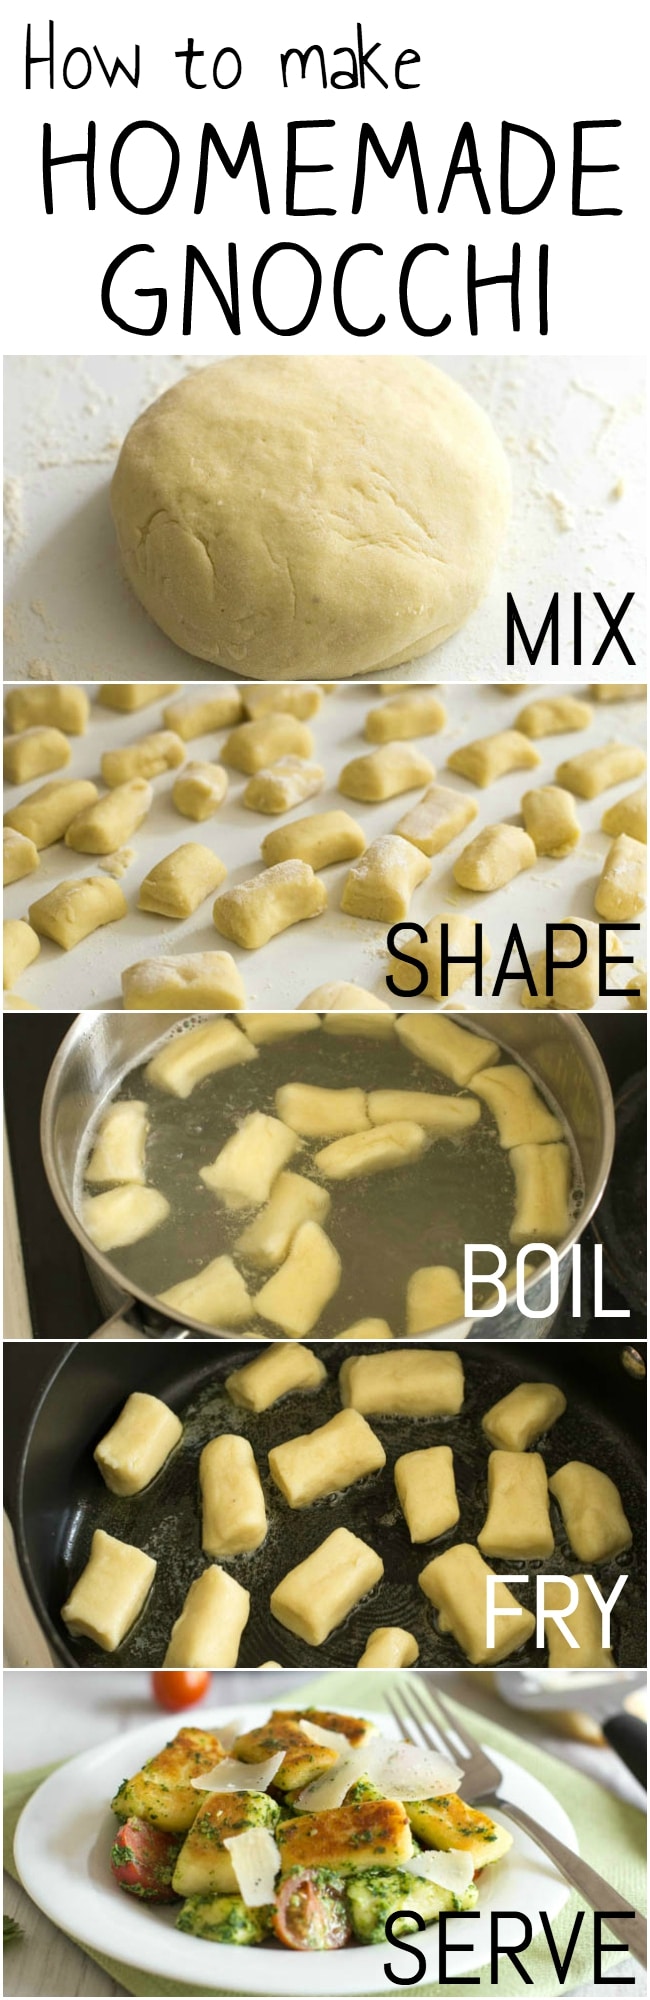 Collage showing how to make homemade gnocchi.